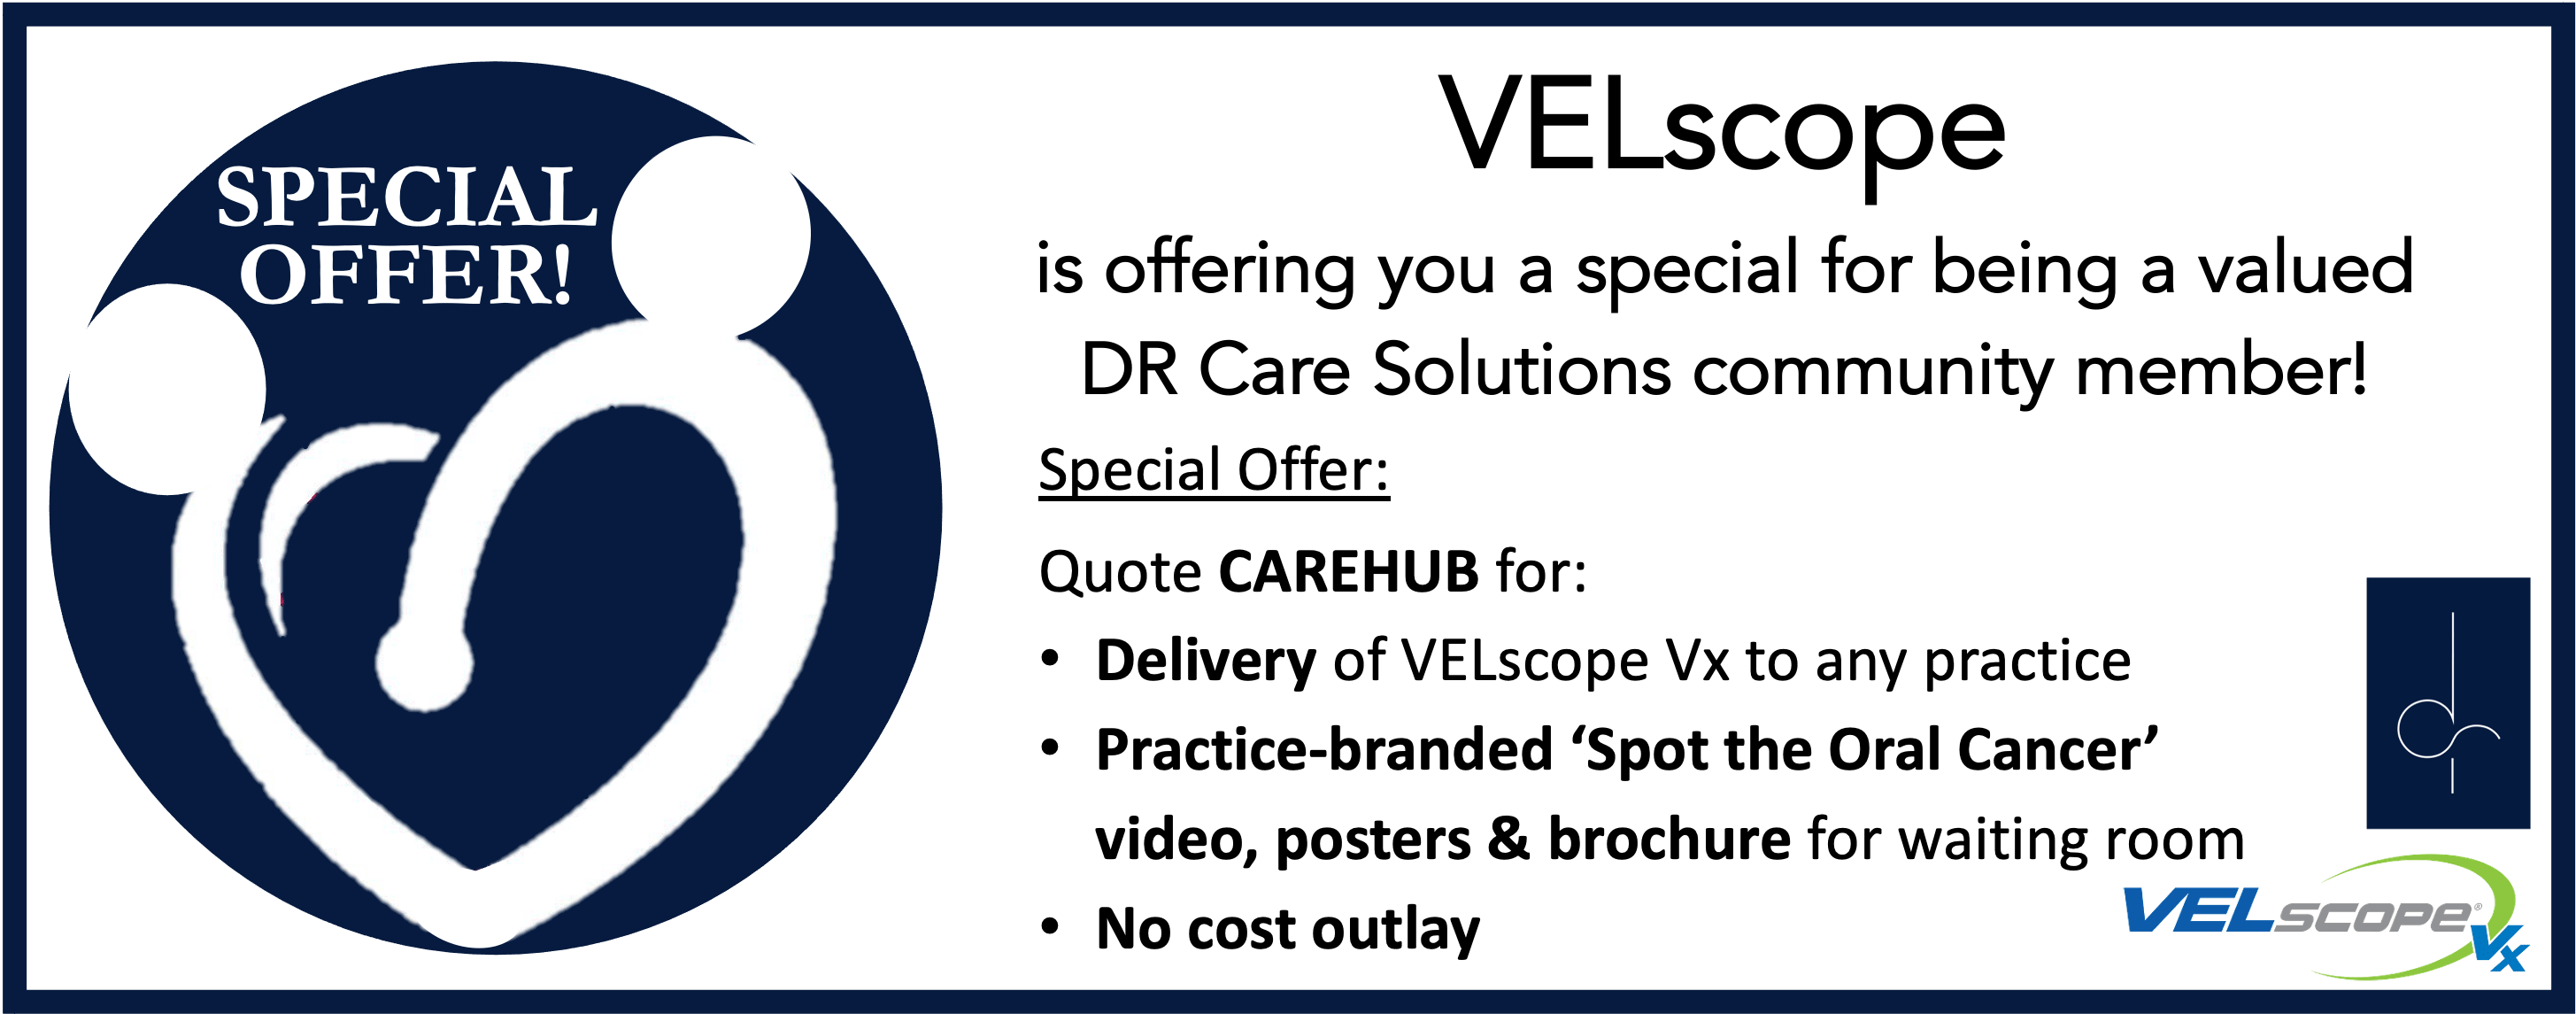 VELscope - Special Offer